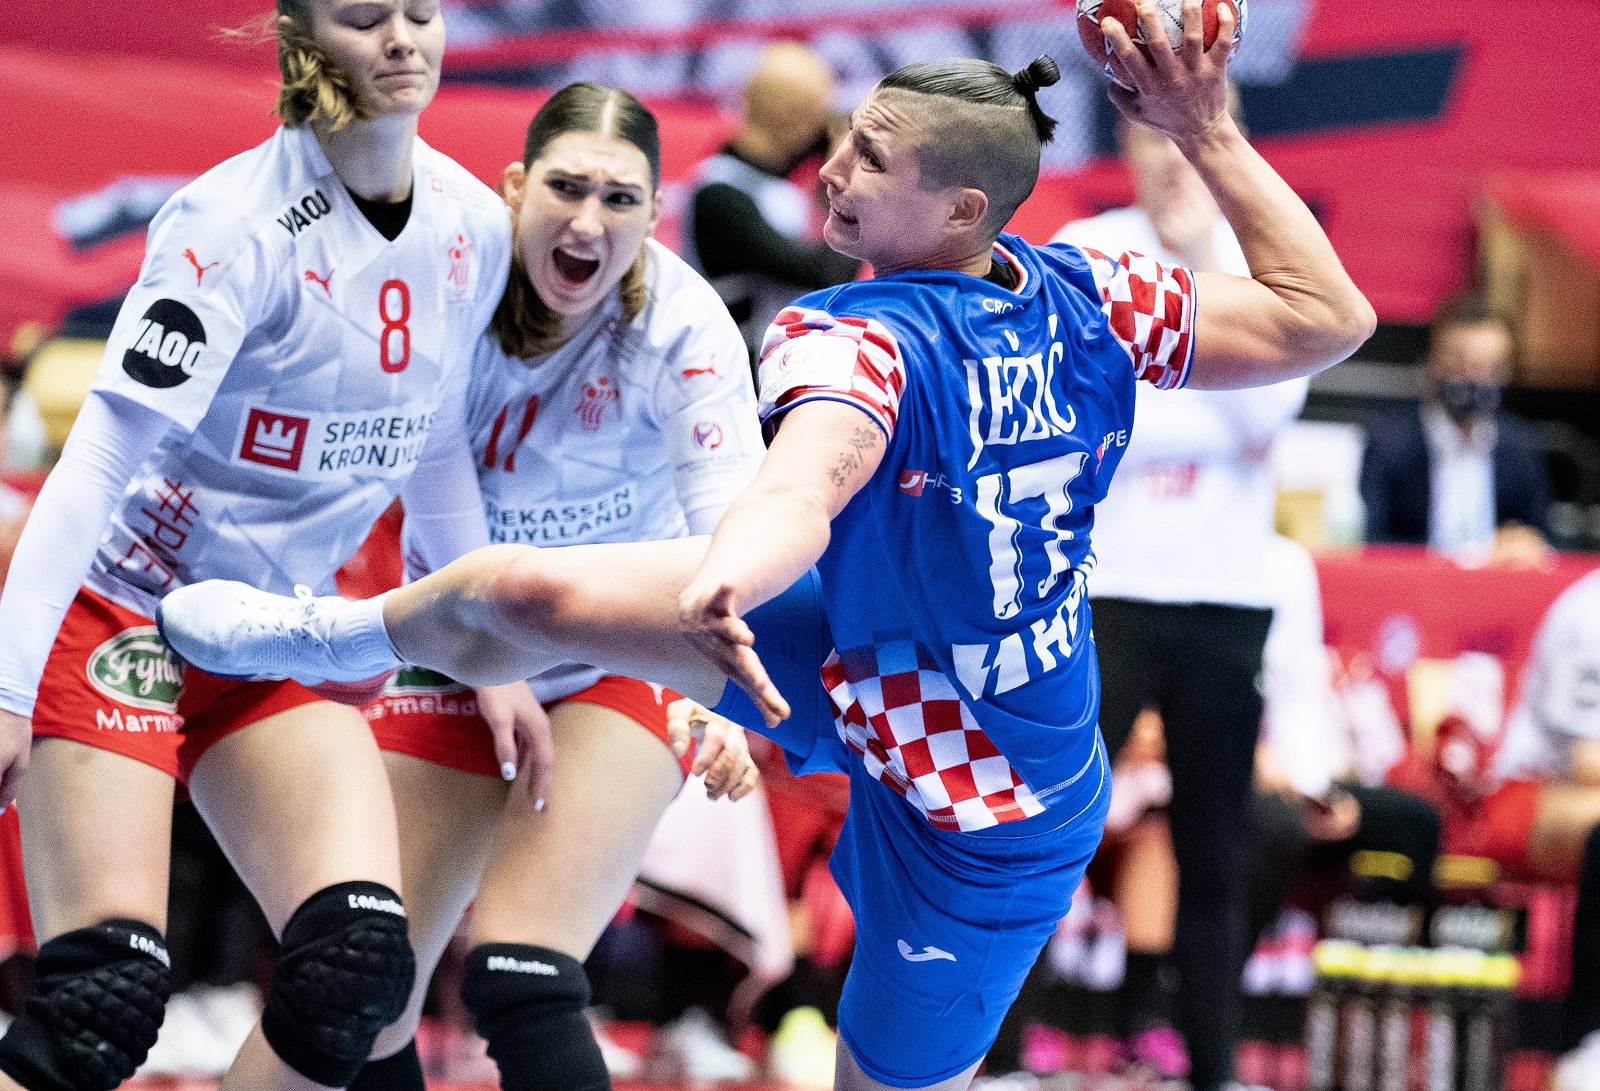 epa08896323 Katarina Jezic of Croatia in action during the bronze medal match between Croatia and Denmark at the EHF Euro 2020 women's European Championships in Herning, Denmark, 20 December 2020.  EPA/HENNING BAGGER  DENMARK OUT